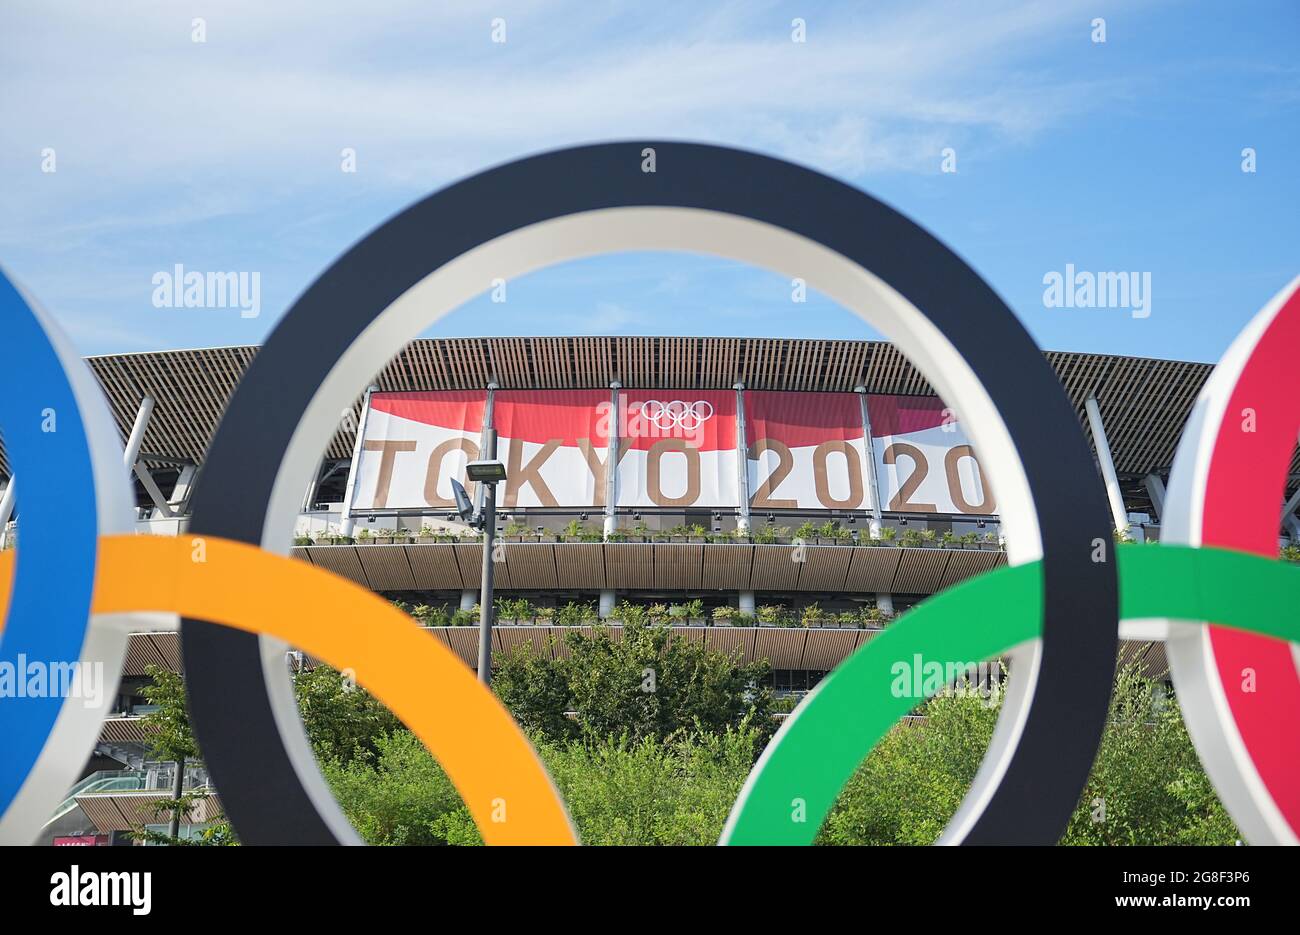 20 July 2021, Japan, Tokio: Olympic rings stand in front of the Olympic Stadium. The Olympic Stadium is the sports venue of the opening ceremony and closing ceremony as well as for the track and field athletes and football. The Olympic Games 2020 Tokyo will take place from 23.07.2021 to 08.08.2021. Photo: Michael Kappeler/dpa Stock Photo